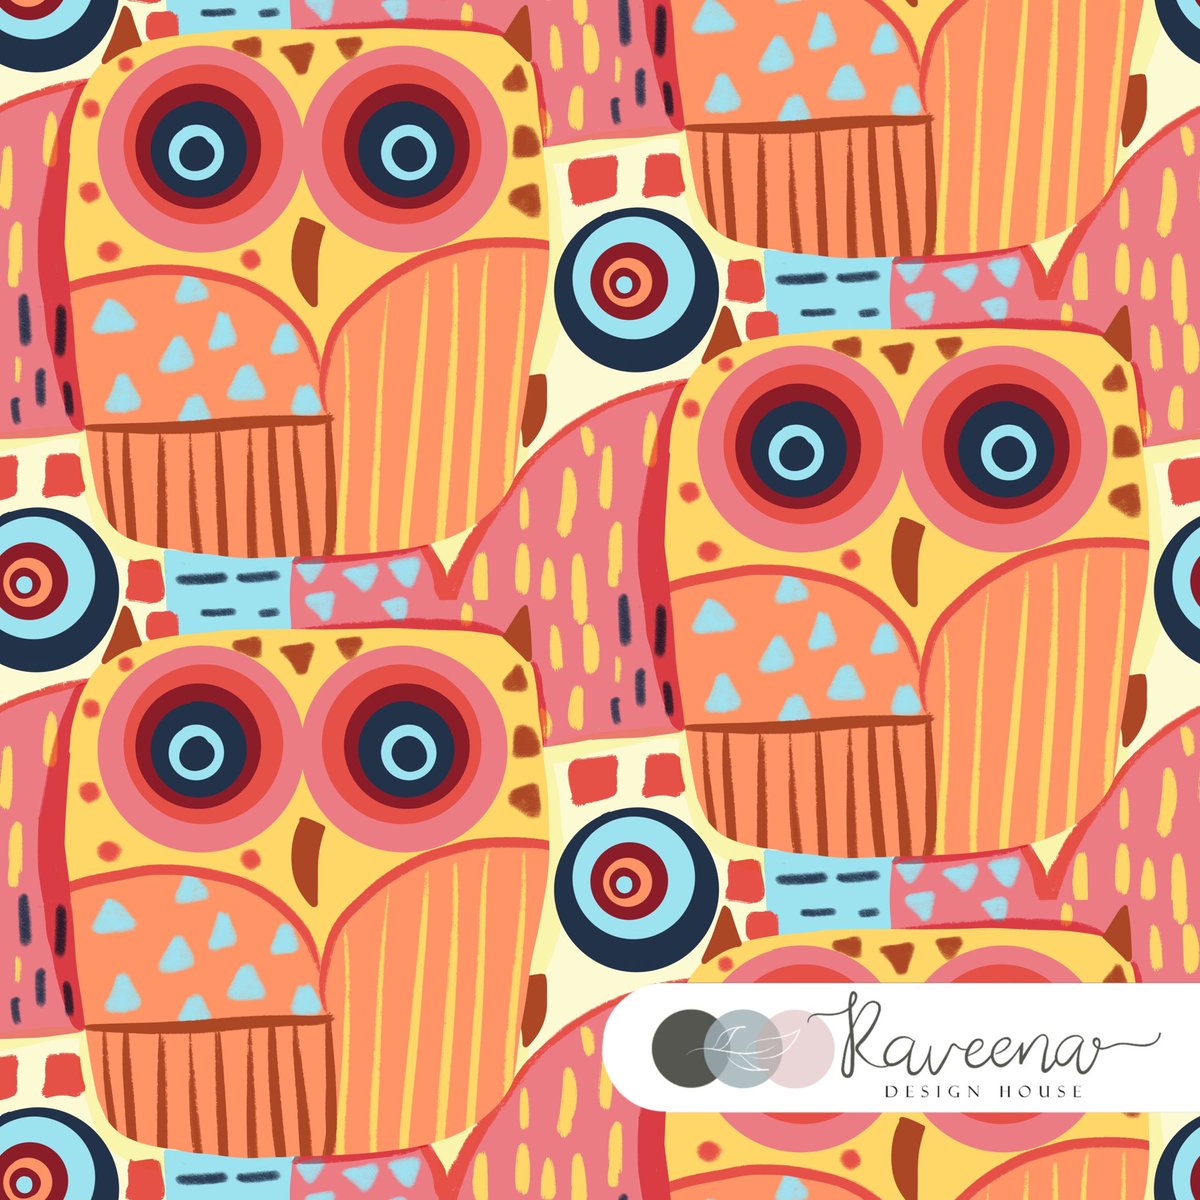 Entry for this week’s @Spoonflower challenge 'birds of prey wallpaper' So excited about this design. Looks funky and bold and brings more joy 

#spookydesign #funkydesign #surfacepatterndesign #spoonflowerdesign #homedecor #wallpaper #BirdsOfPrey #patternobserver #printandpattern